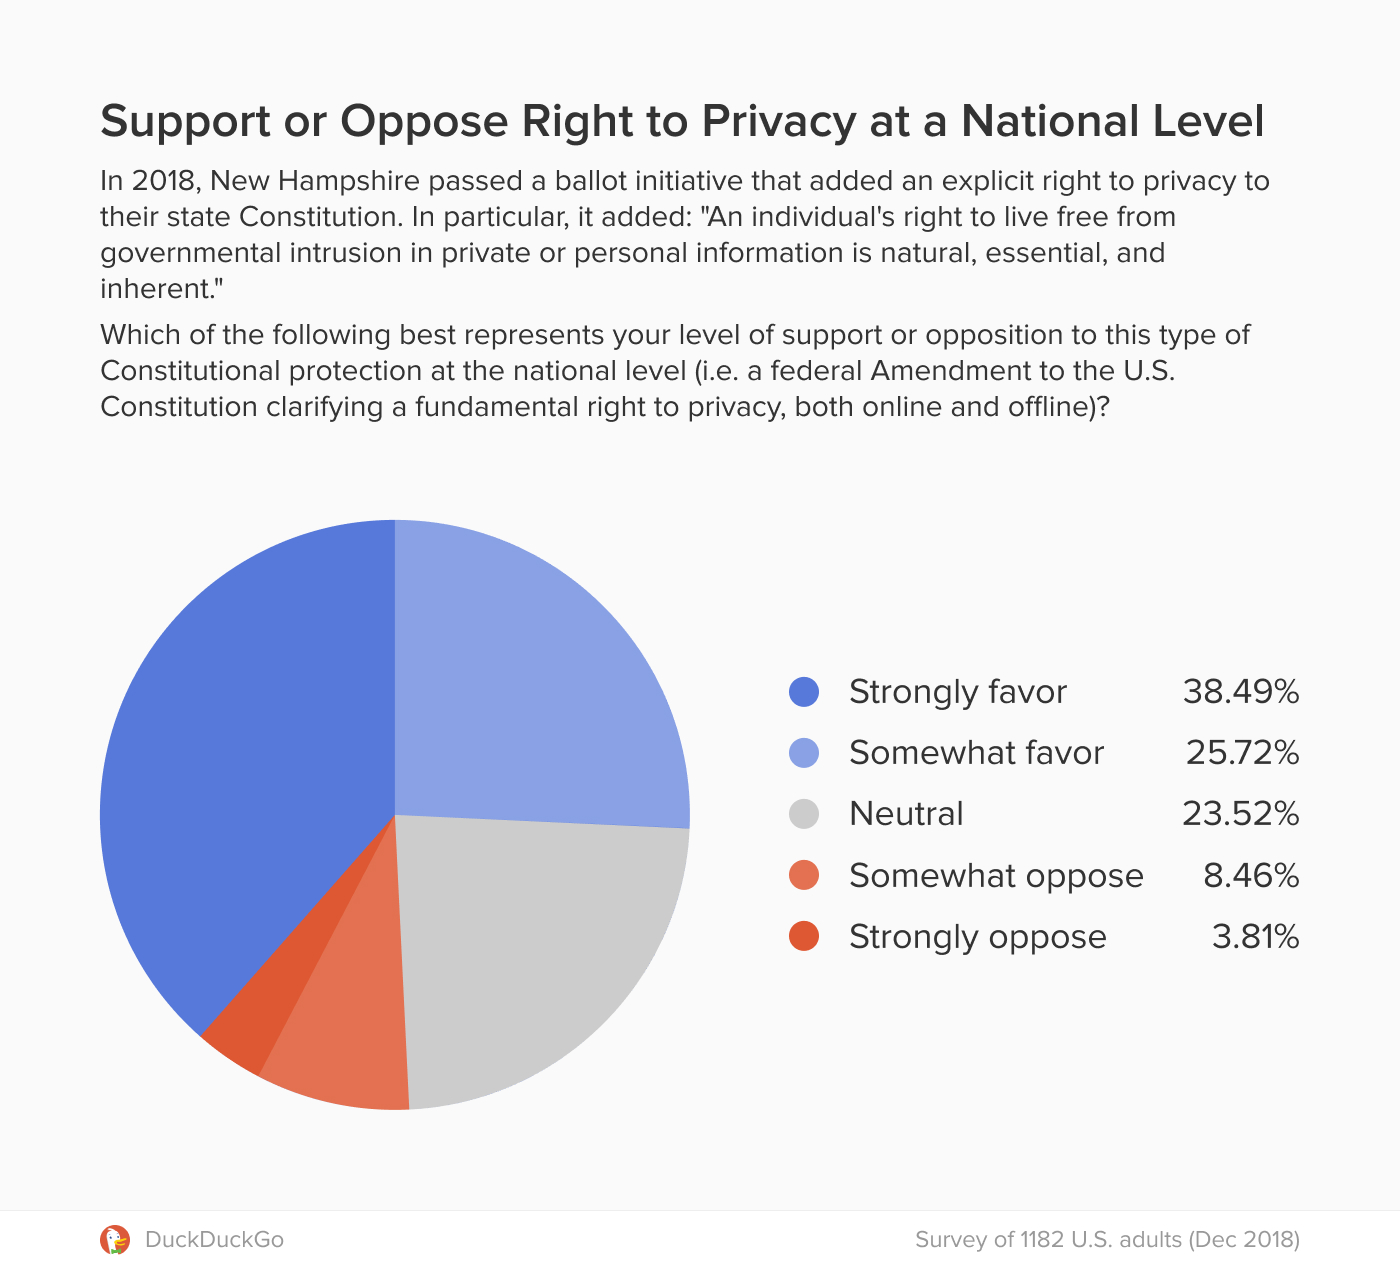 Chart showing strong support for Constitutional privacy protection at the national level in the U.S.